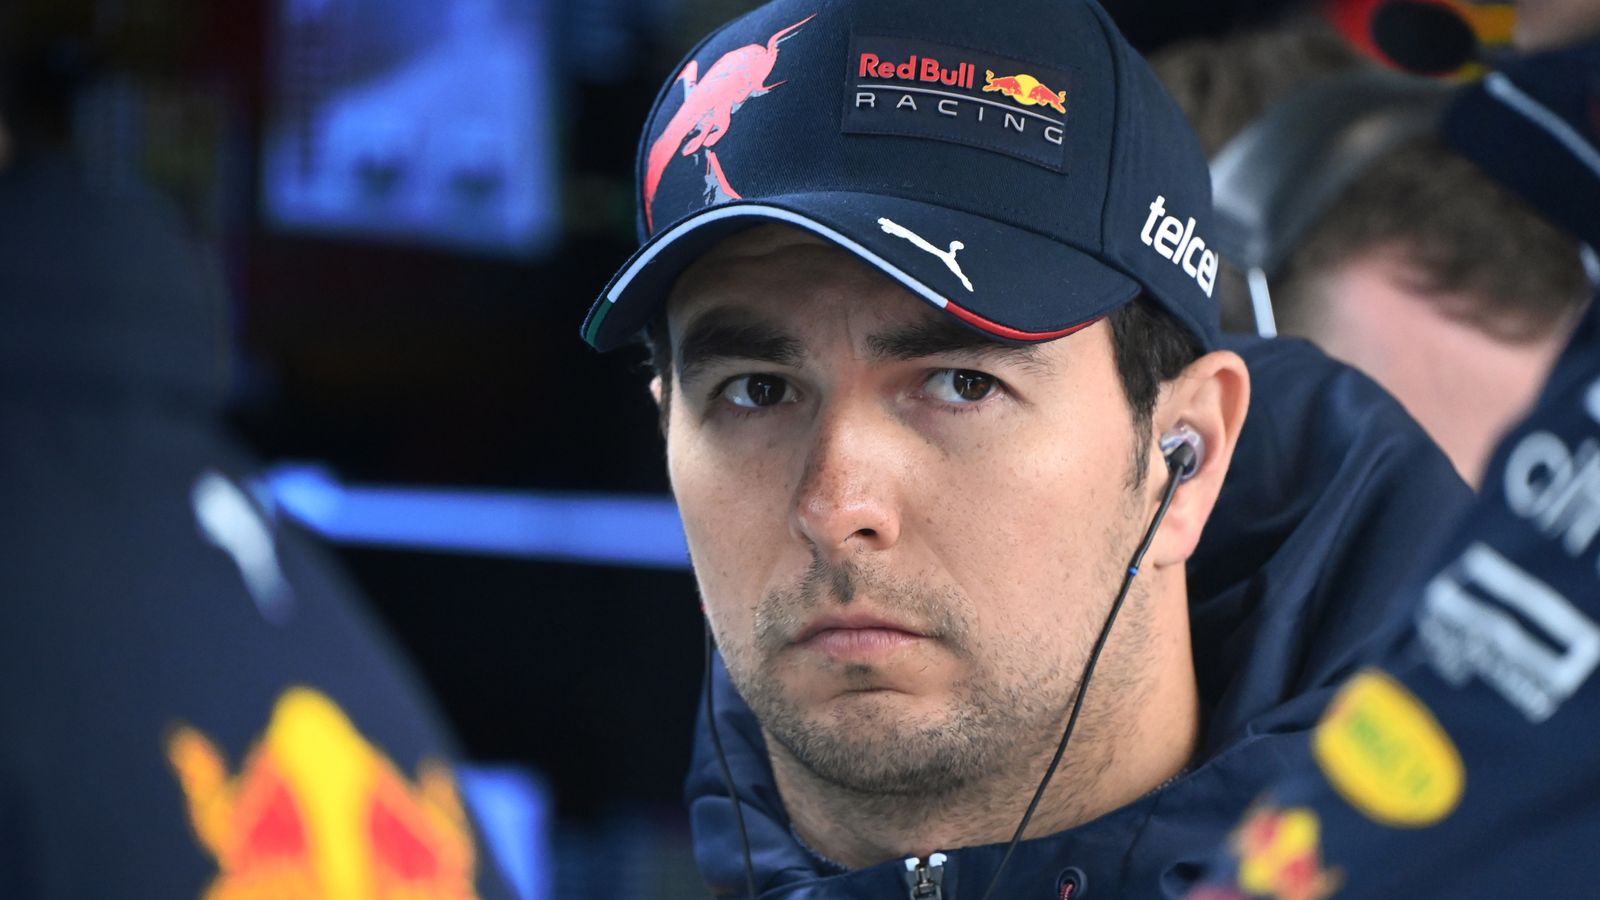 Sergio Perez sorry for qualifying crash at Canadian Grand Prix as Max Verstappen celebrates pole